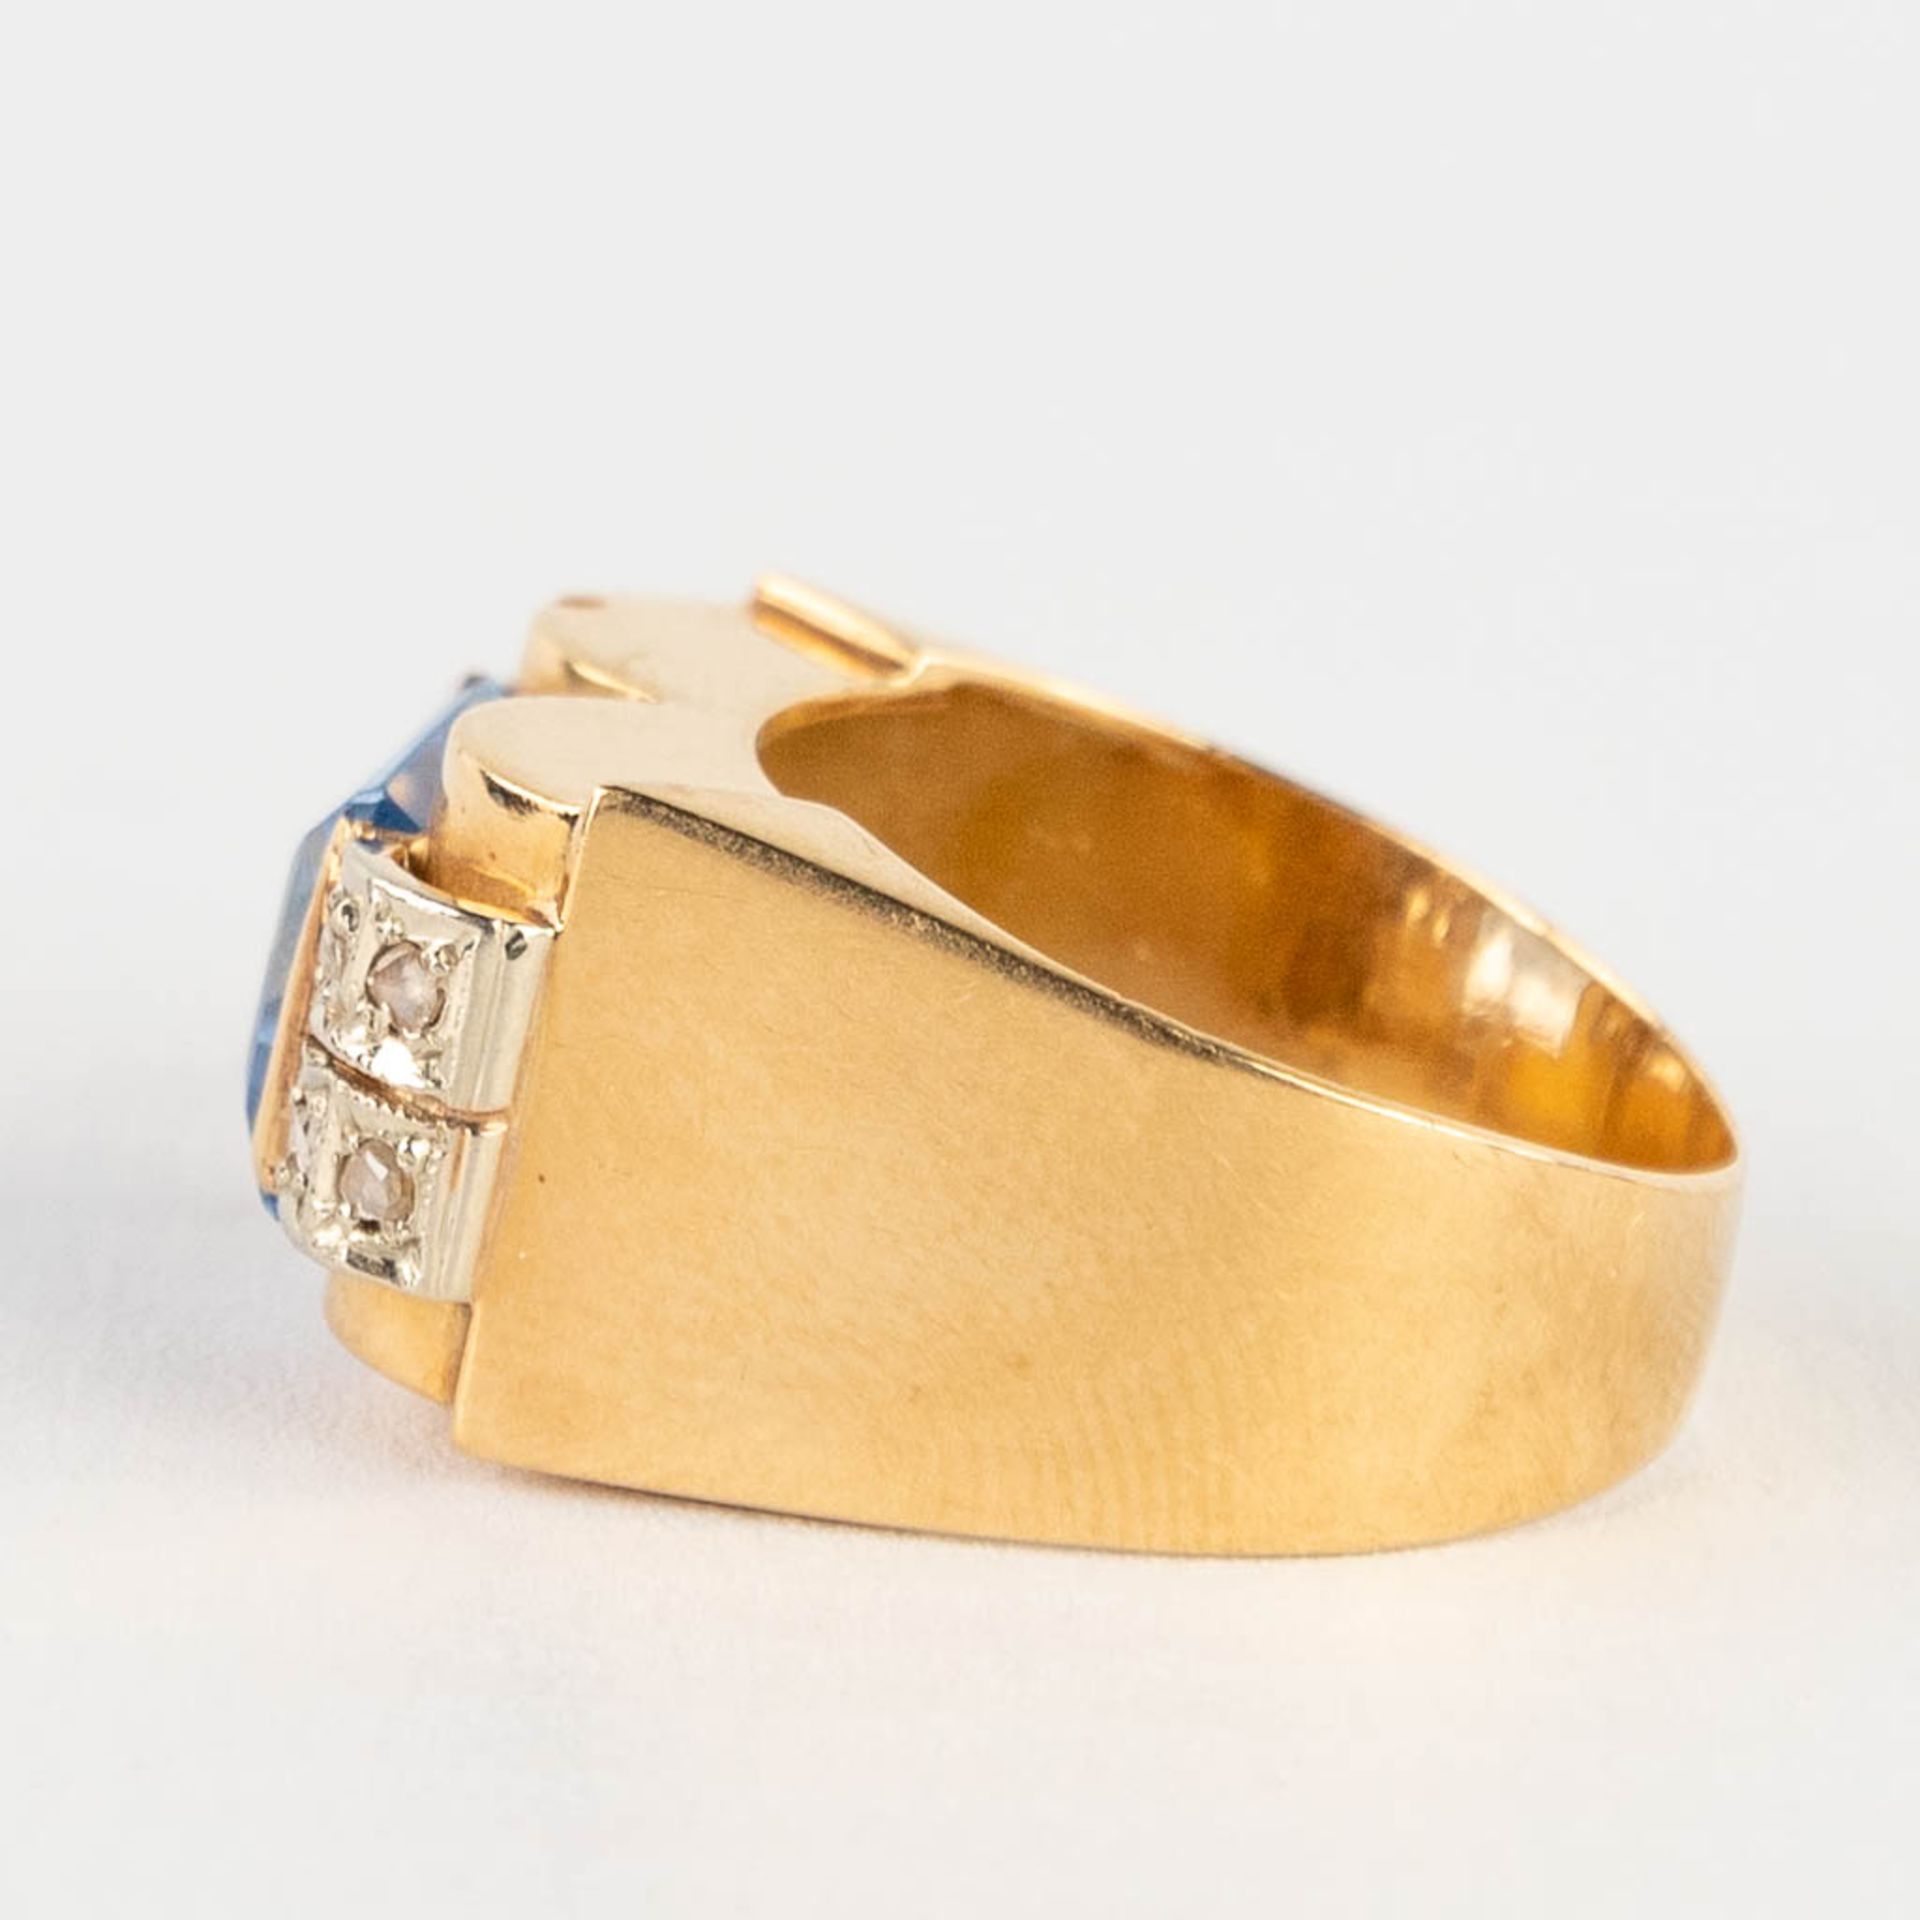 A ring, yellow gold with light blue cut stone/glass. 8,29g. Ring size: 58. 18 karat gold. - Image 5 of 10